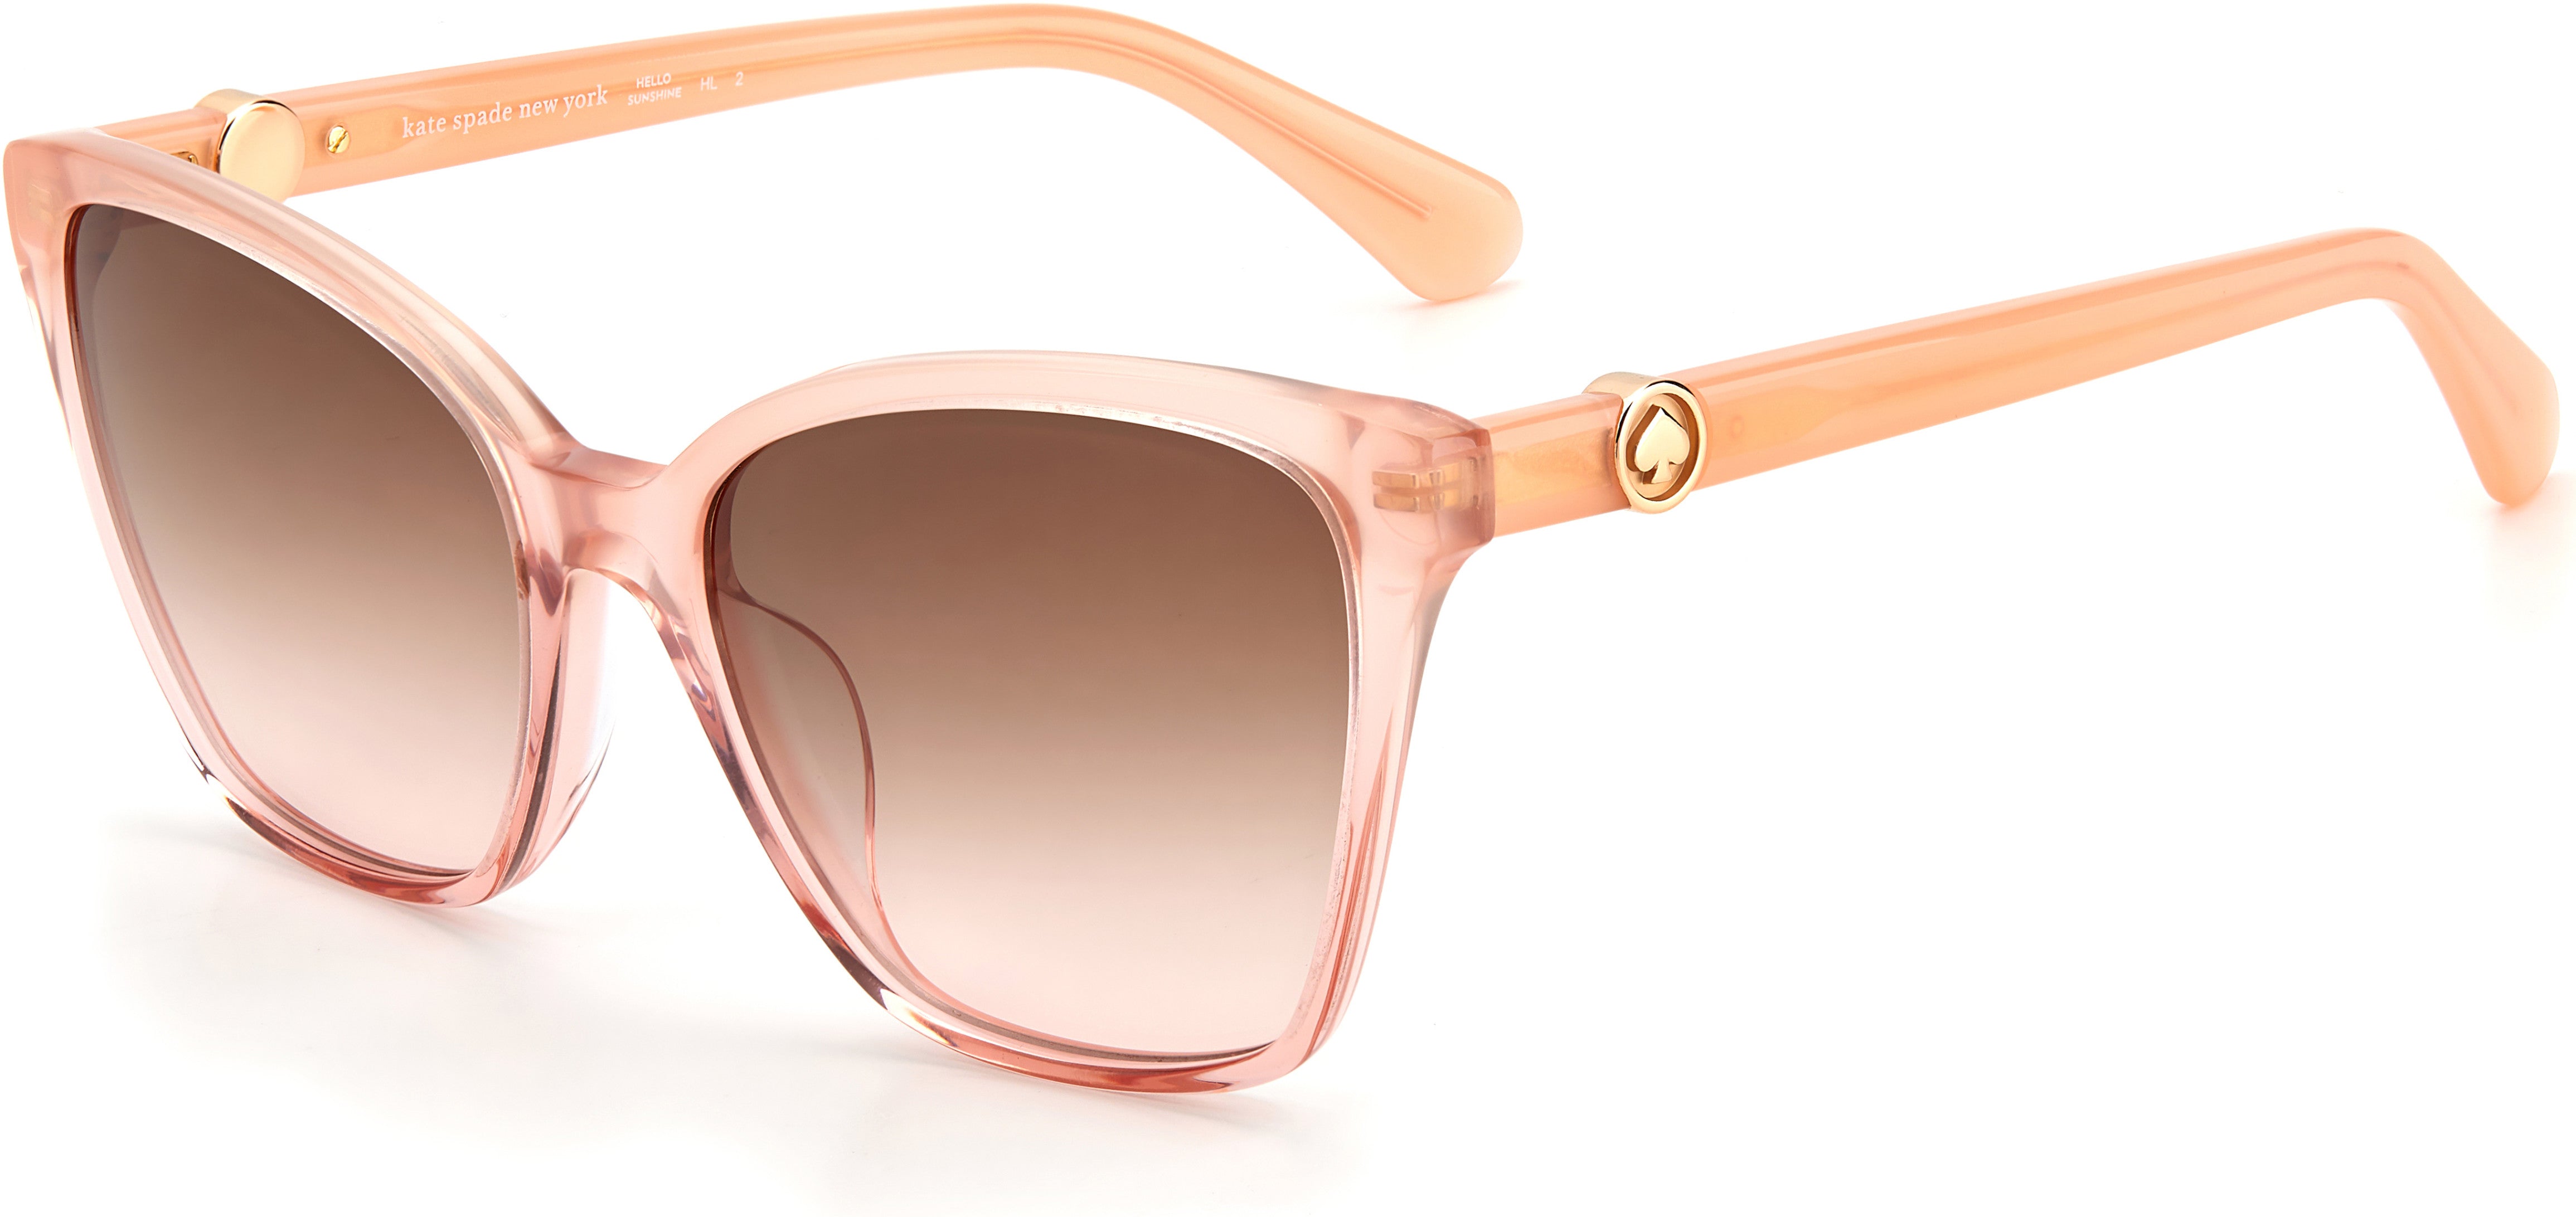 Kate Spade Amiyah/G/S Cat Eye/butterfly Sunglasses 0733-0733  Peach (M2 Brown Pink Gradient)